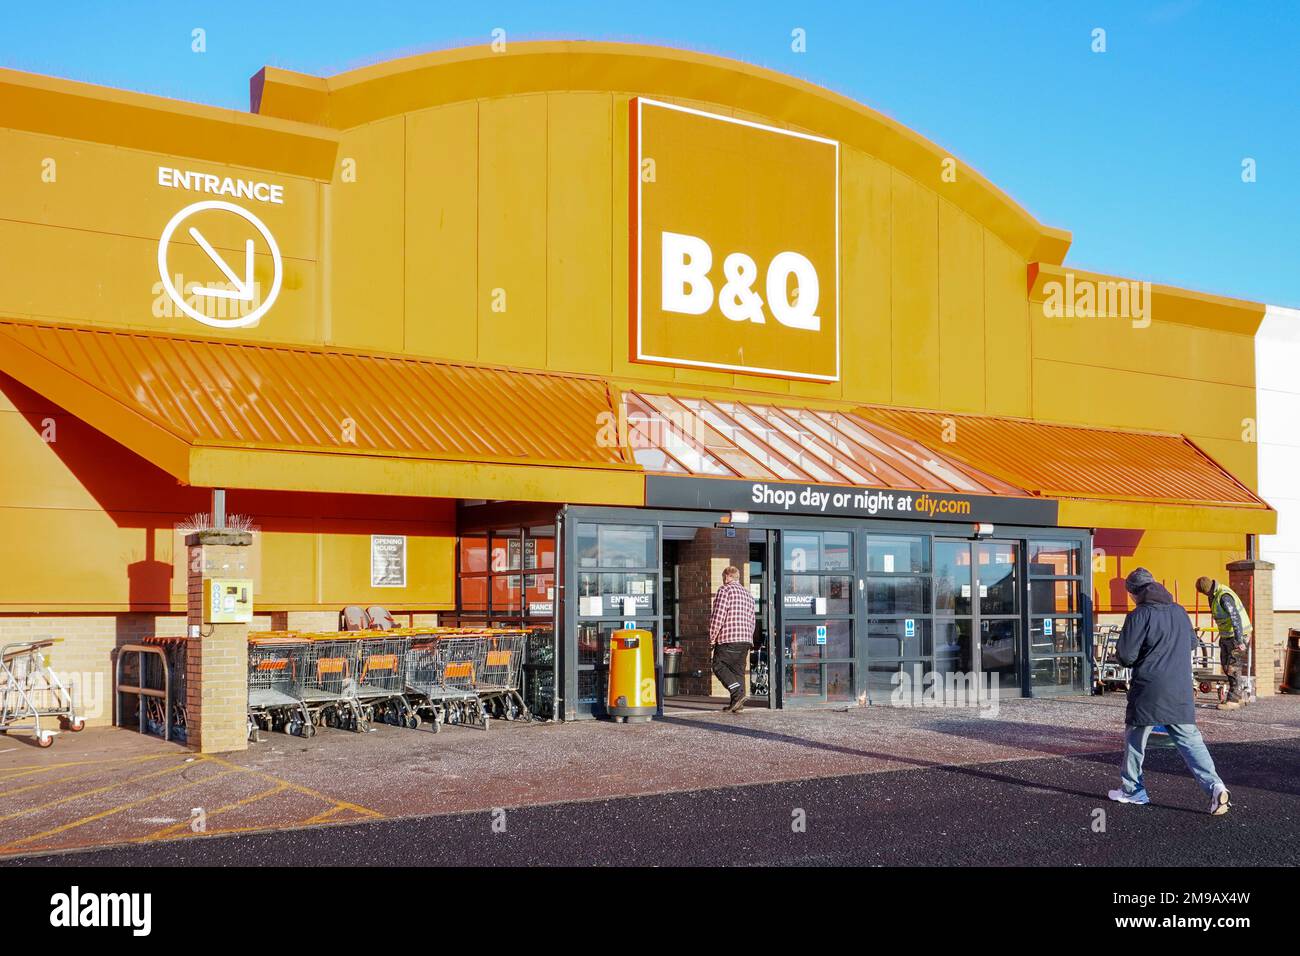 Entrance to the DIY store 'B & Q', with customers, Stevenston, Scotland, UK Stock Photo